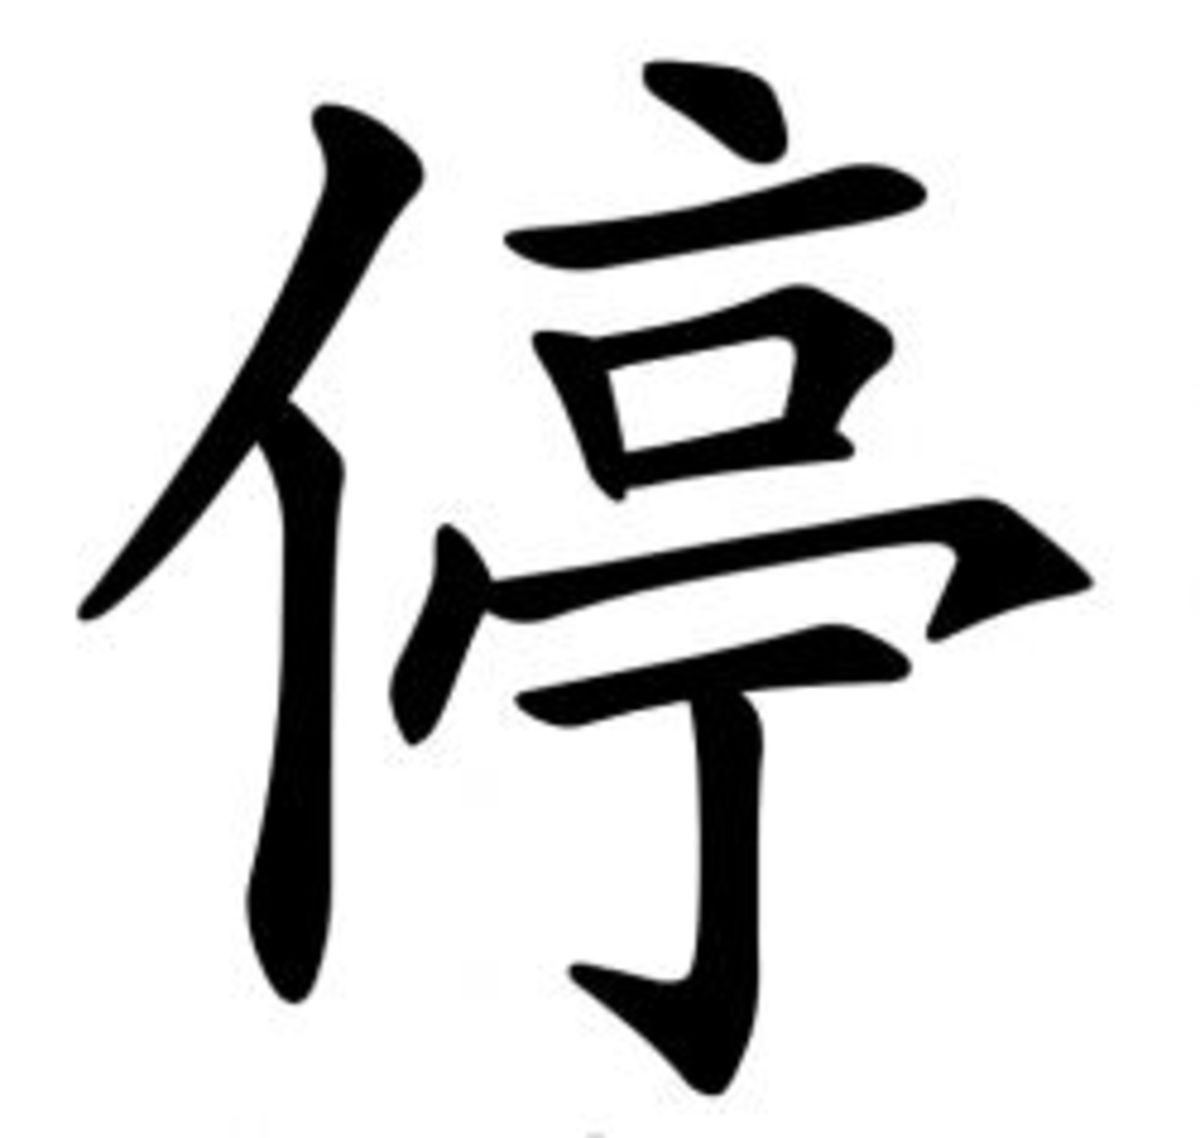 Ting - the Chinese Character that means STOP